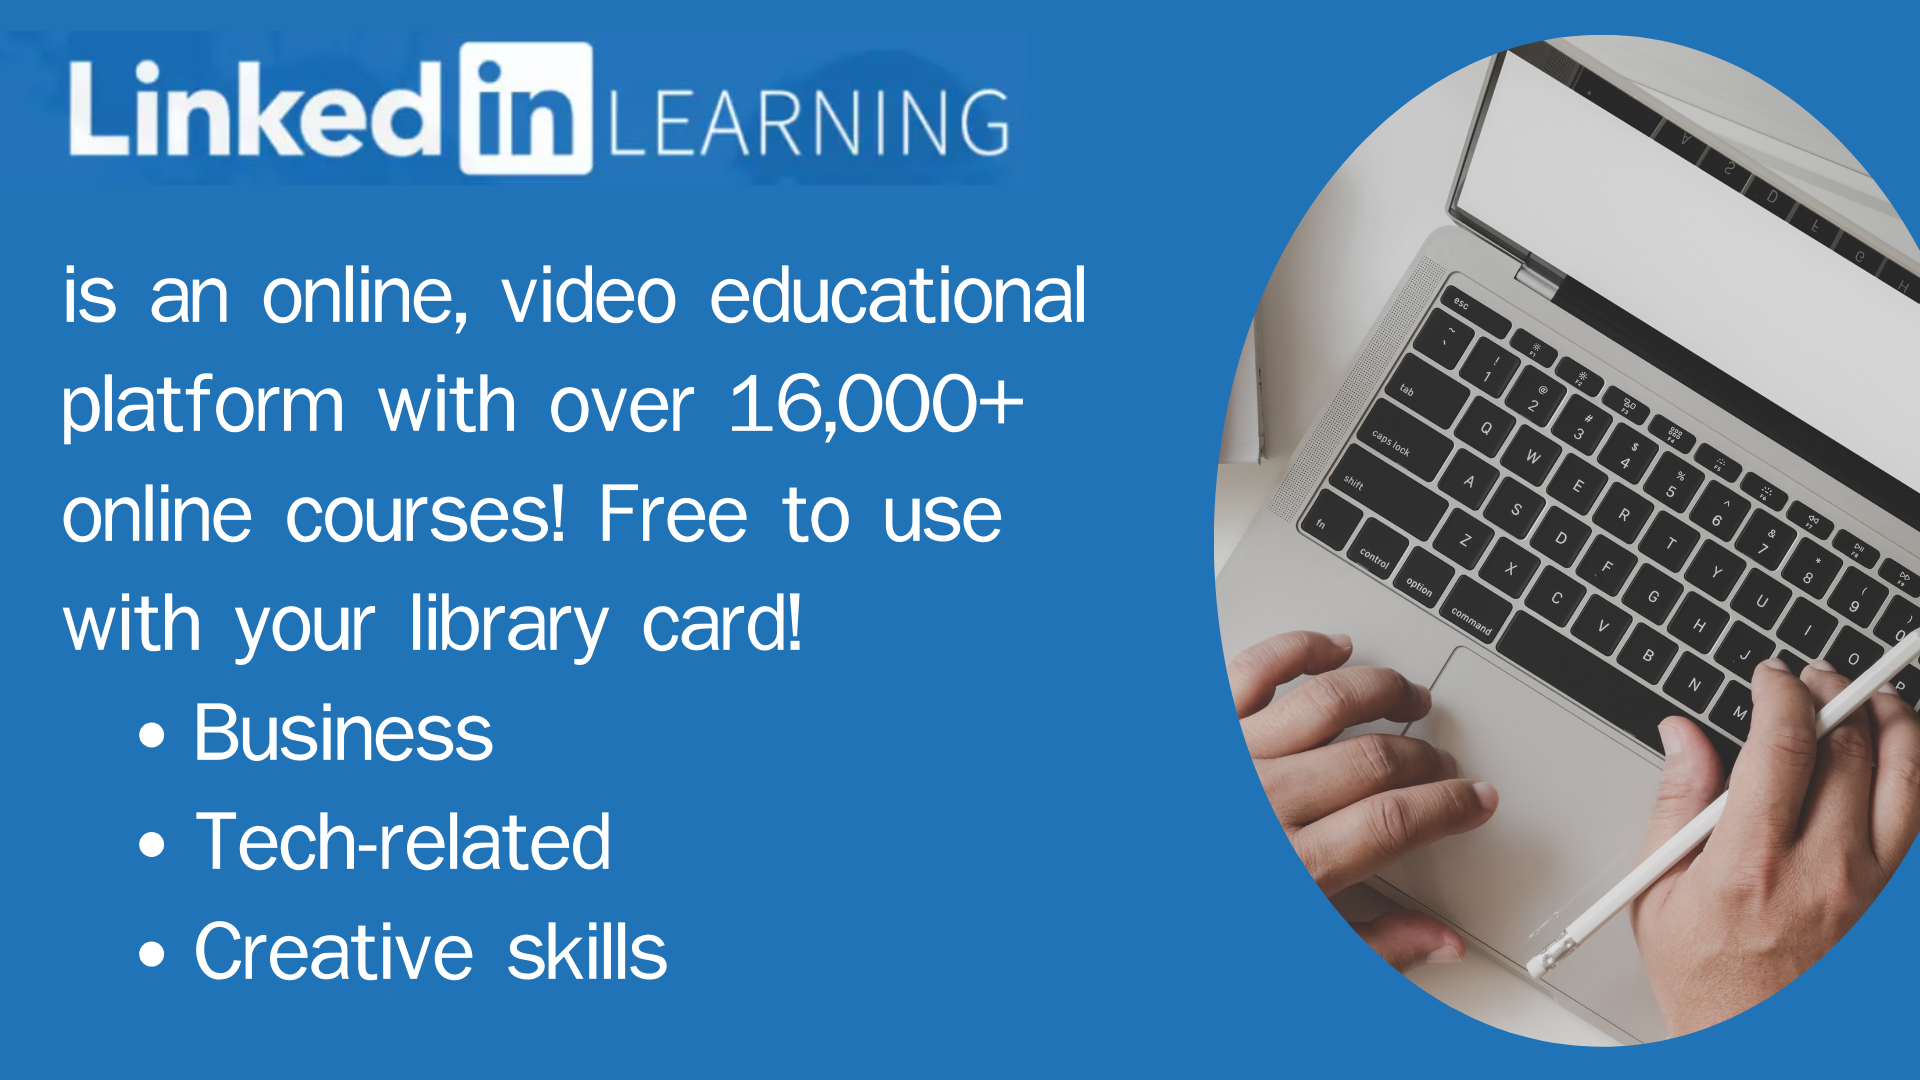 Linkedin Learning is an online, video educational platform with over 16,000+ online courses! Free to use with your library card! Business Tech-related Creative skills